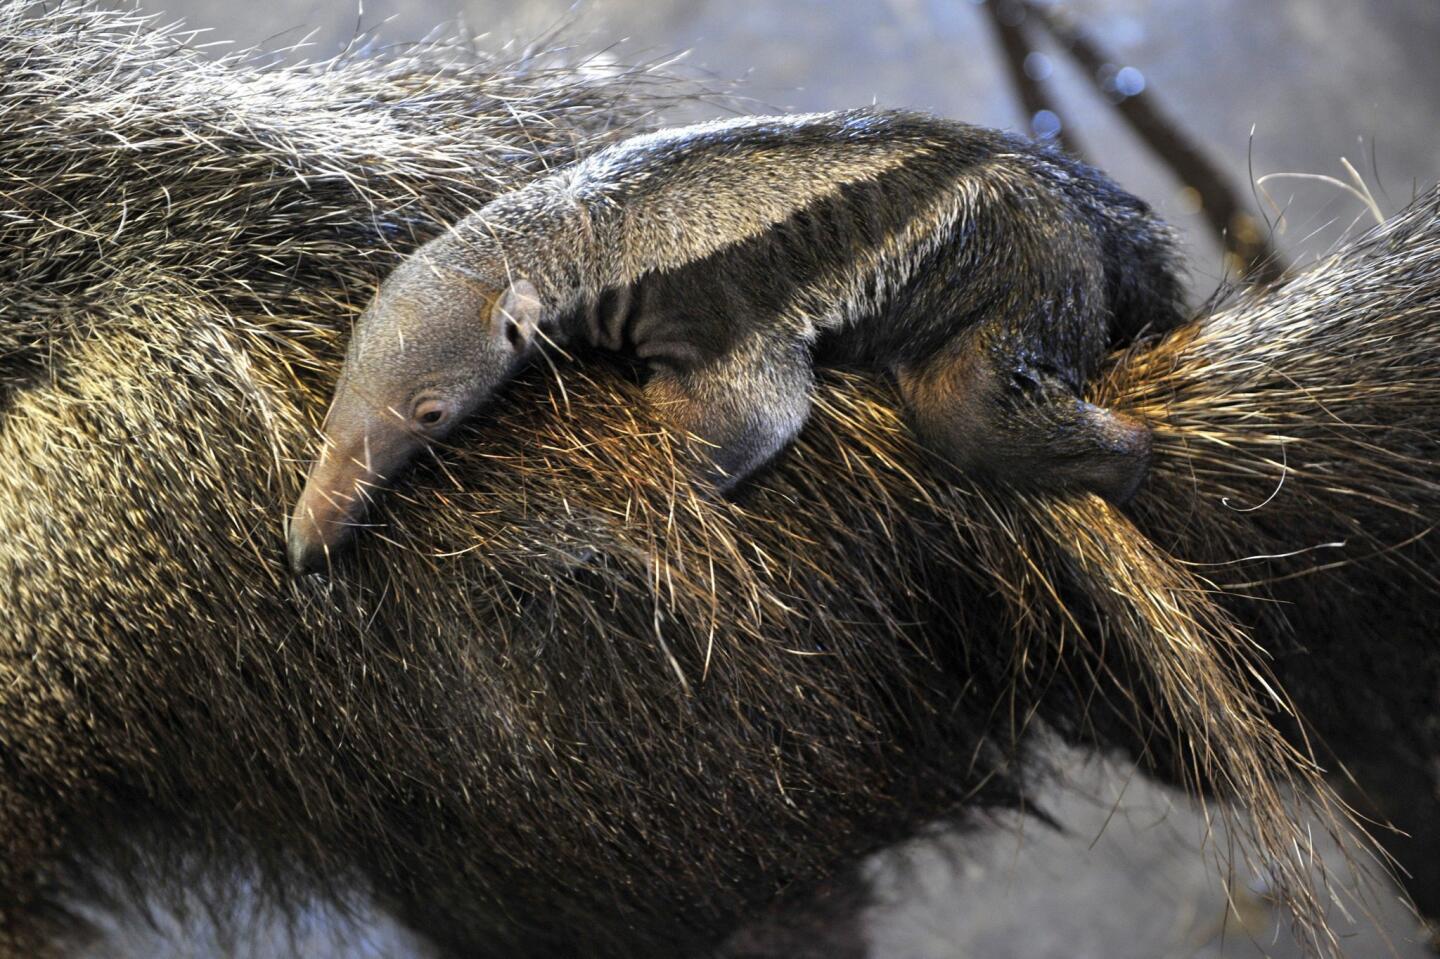 A 2-day old baby giant anteater rides on the back of its mother Isabella in their enclosure in the Budapest Zoo in Budapest, Hungary, on Oct. 7, 2016.